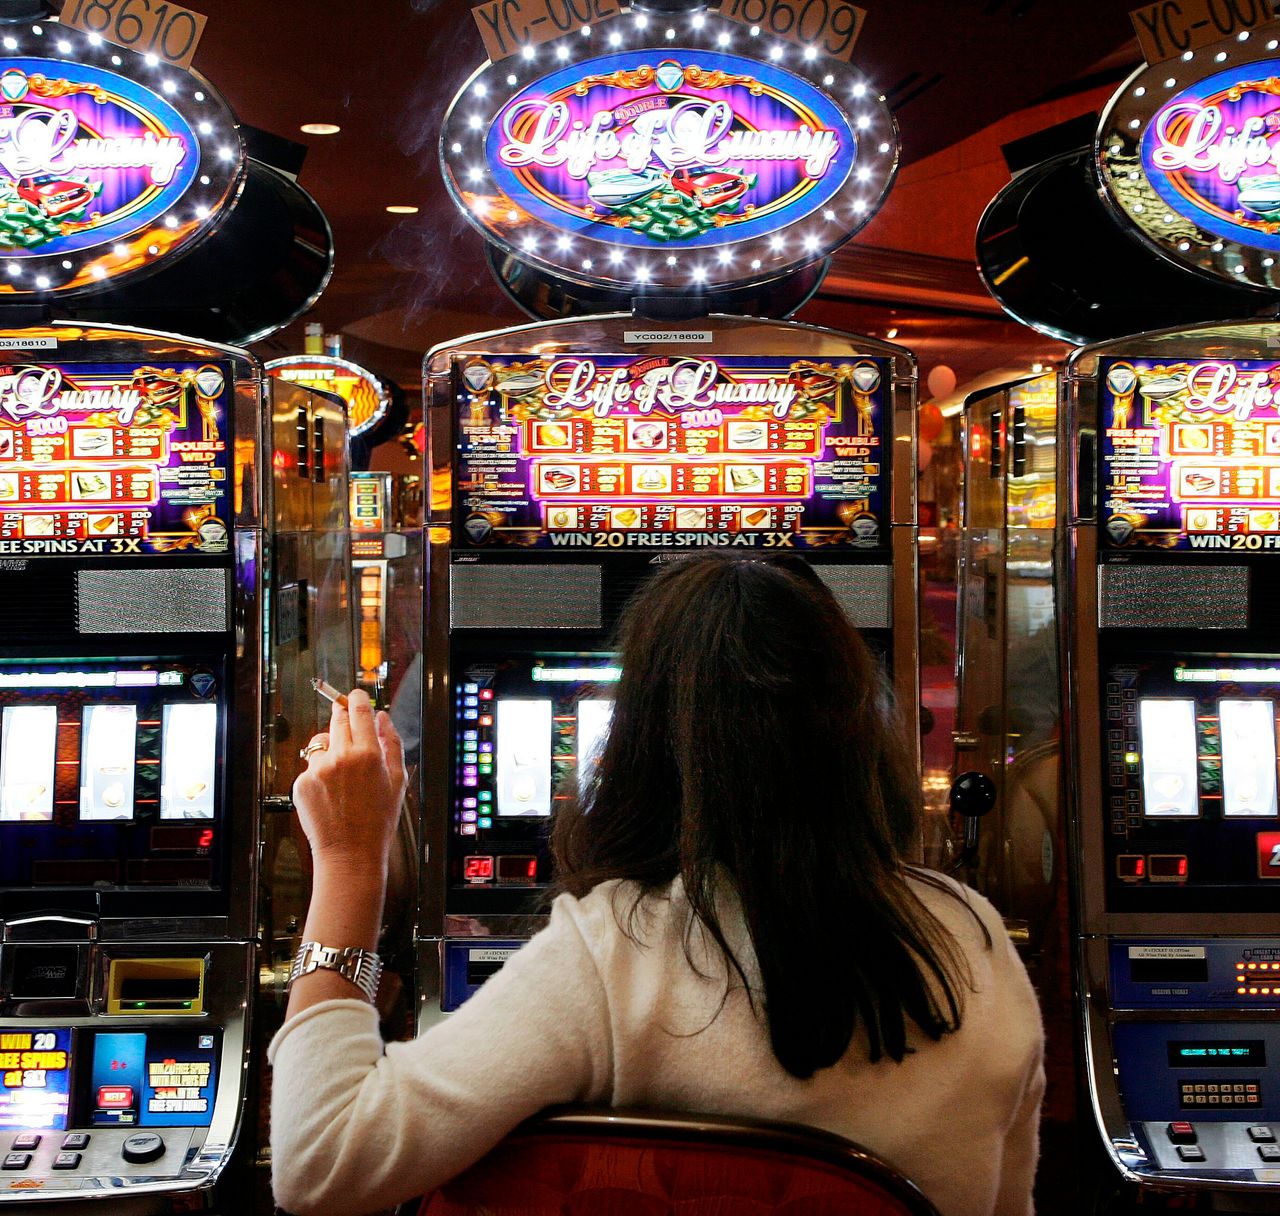 A woman smokes while playing slots at the former Trump Taj Mahal in Atlantic City in 2007. The City Council barred smoking the following year but quickly reversed the ban. Today casinos are allowed to have smoking on 25% of the game floor.